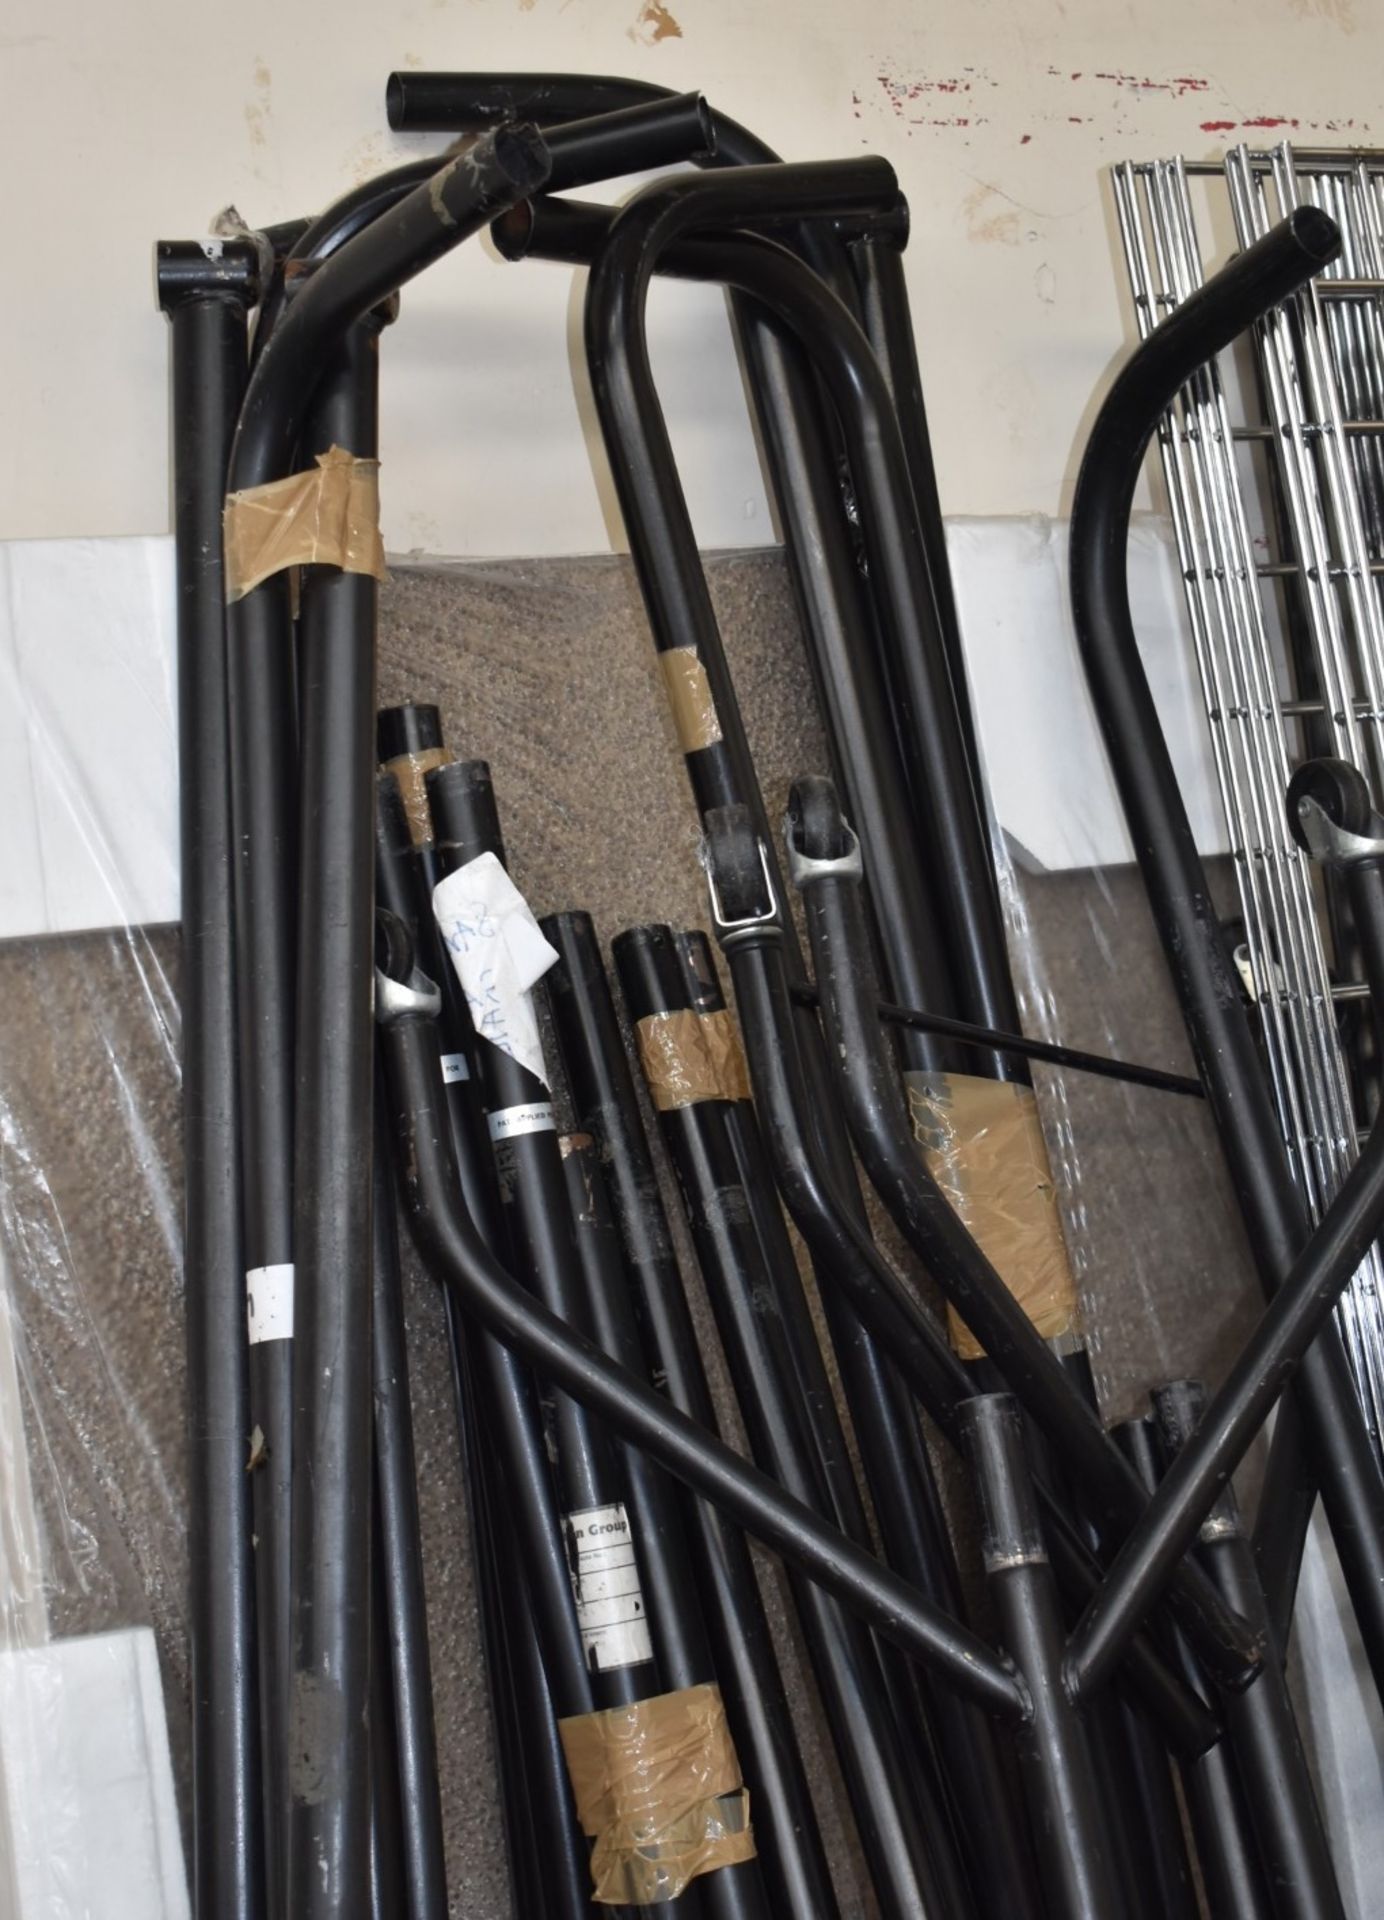 6 x Clothes Rail Stands With Castor Feet - Image 3 of 6